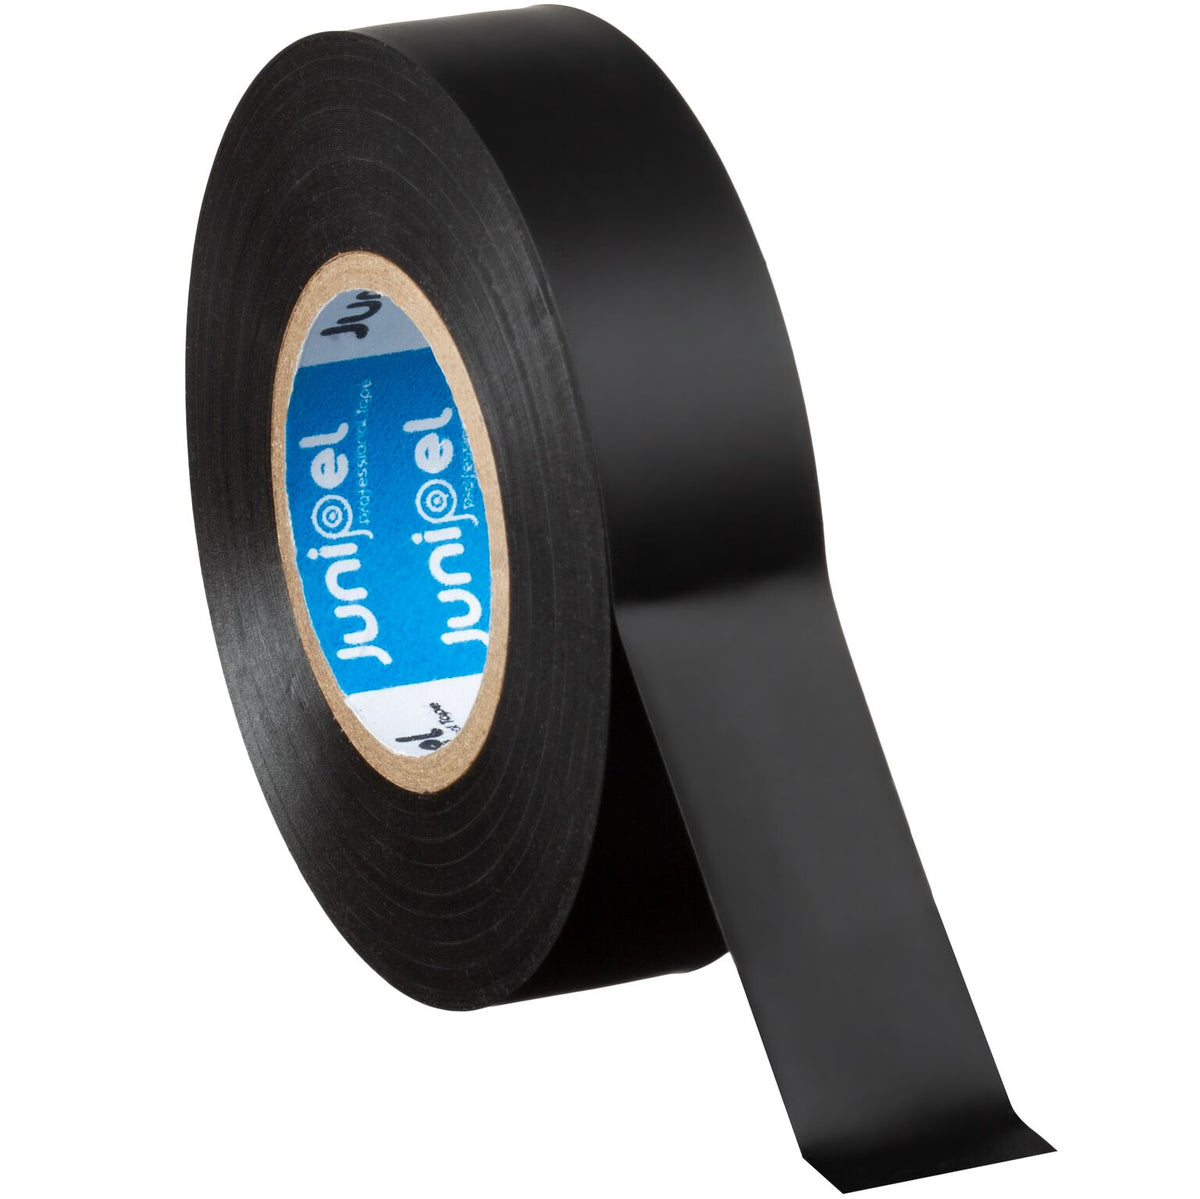 T.R.U. El-766aw Brown General Purpose Electrical Tape 3/4 in. Width x 66' Length UL/CSA Listed Core. Utility Vinyl Electrical Tape